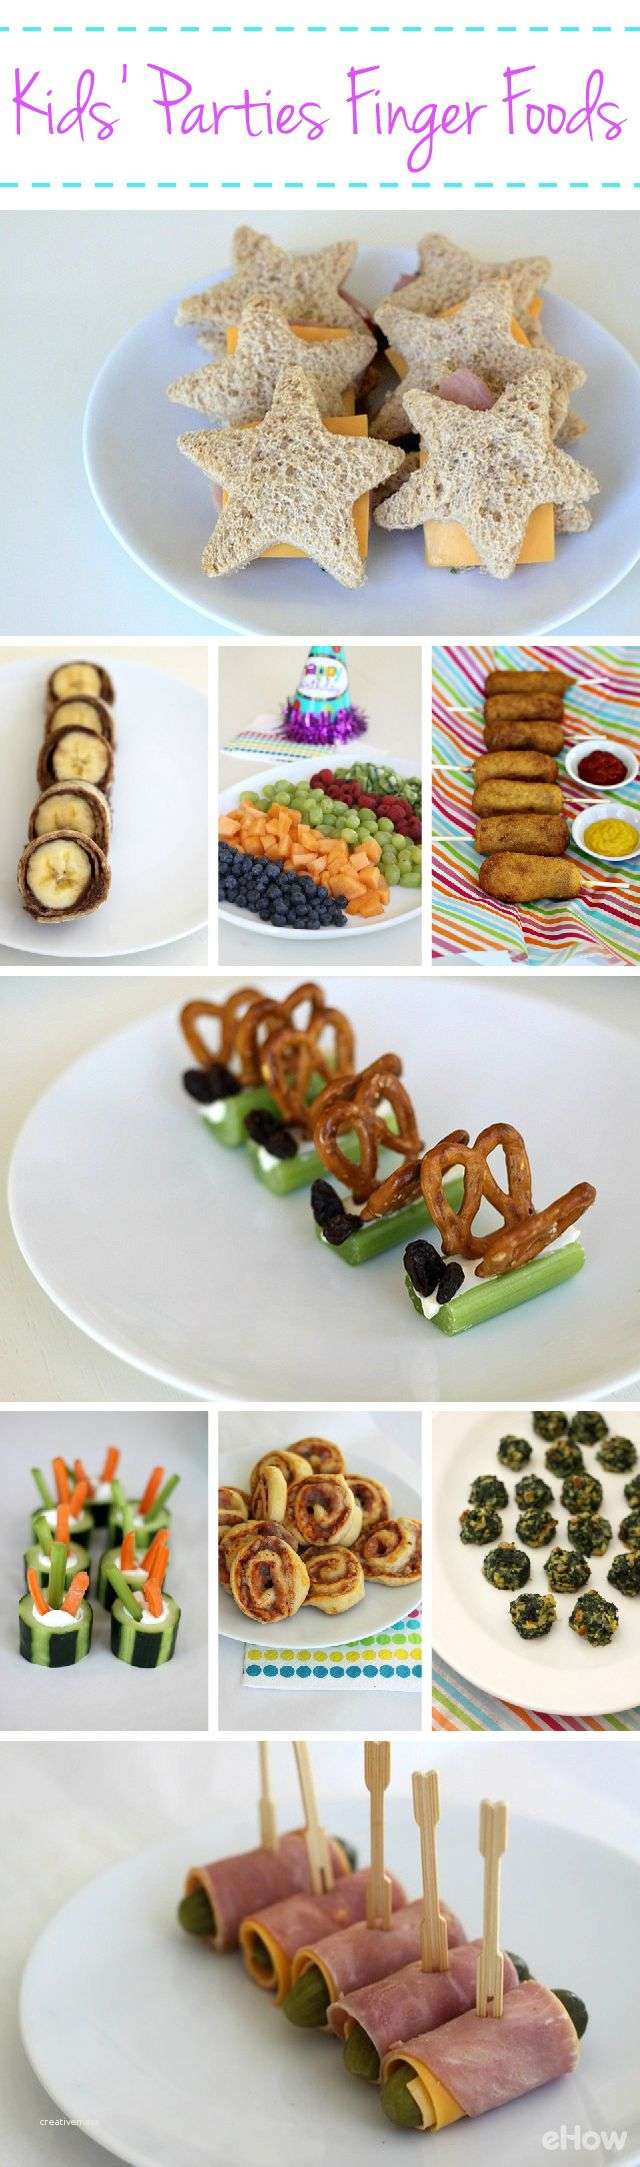 Party Finger Food Ideas For Adults
 Lovely Birthday Party Finger Food Ideas for Adults